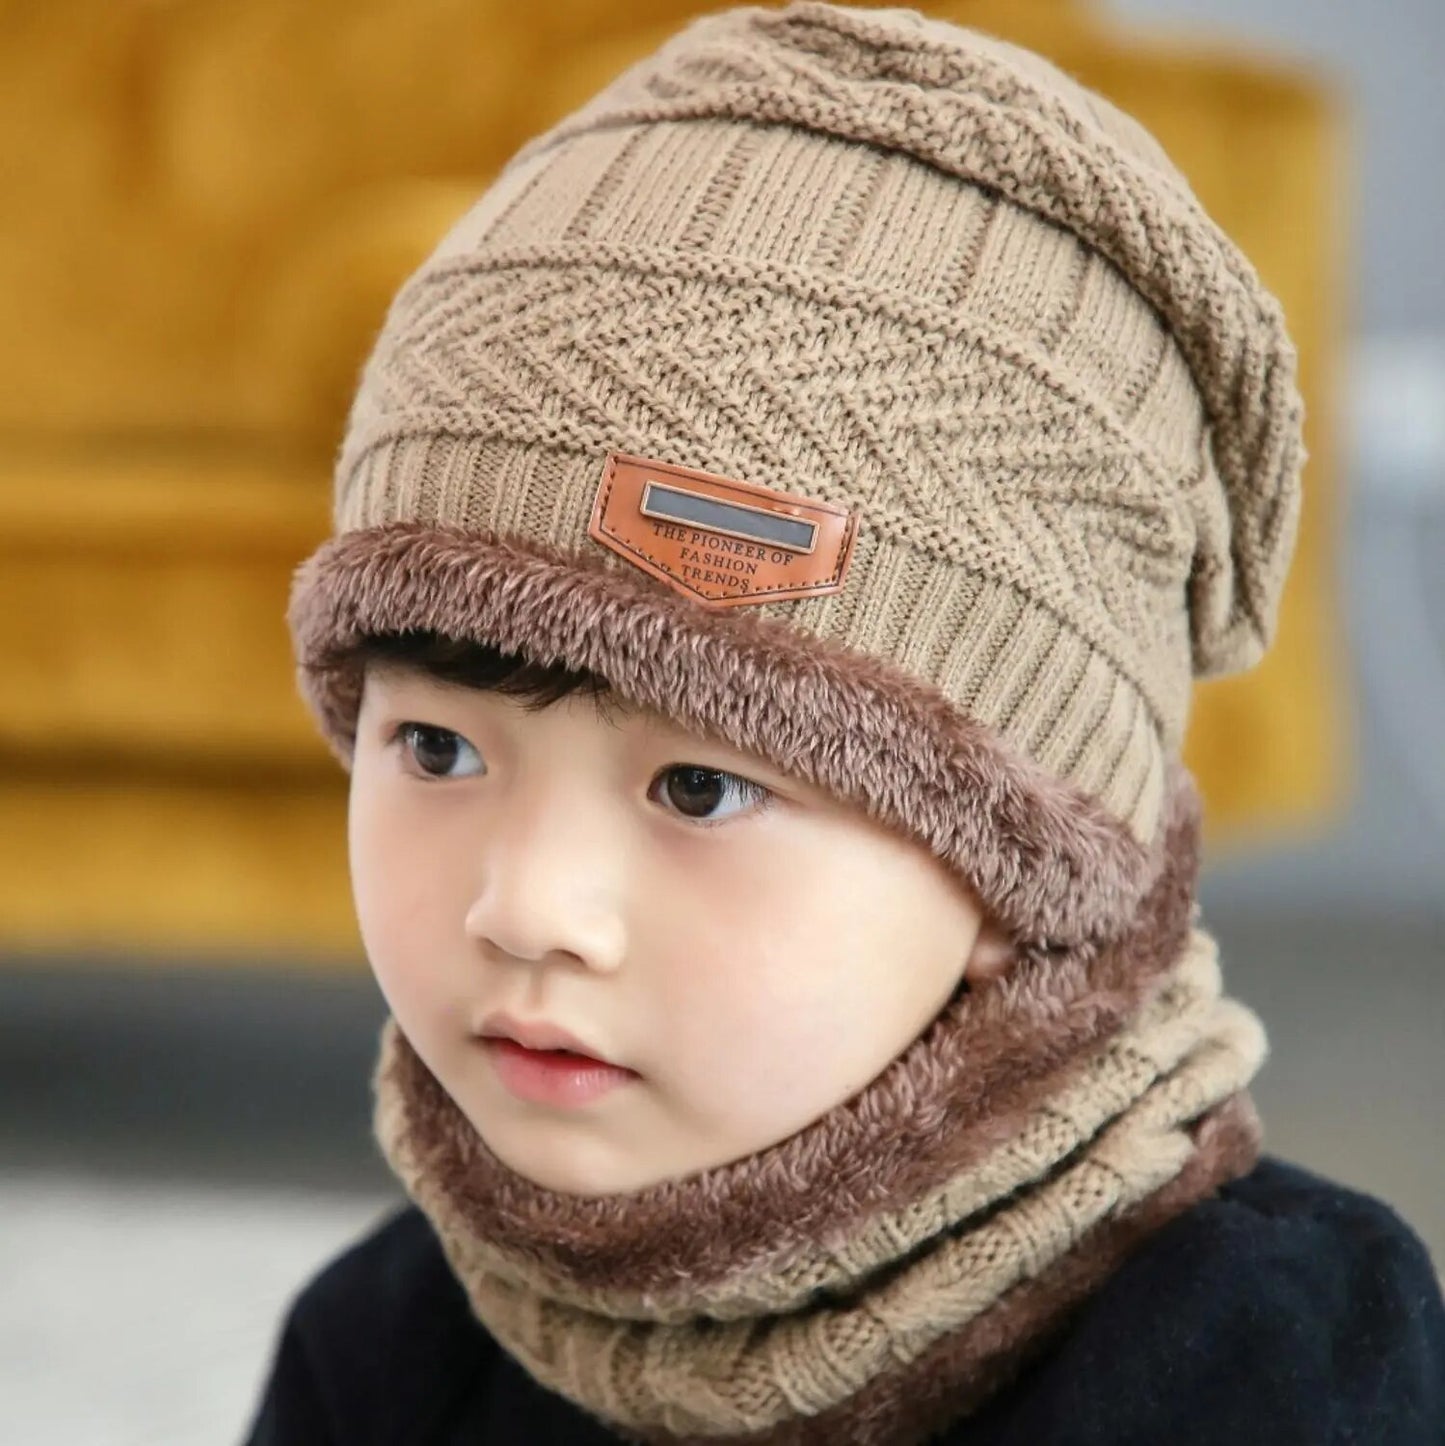 YOYOCORN velvet cap parent child 2pcs super warm Winter balaclava Beanies Knitted Hat and scarf for 3-13 years old girl boy hats